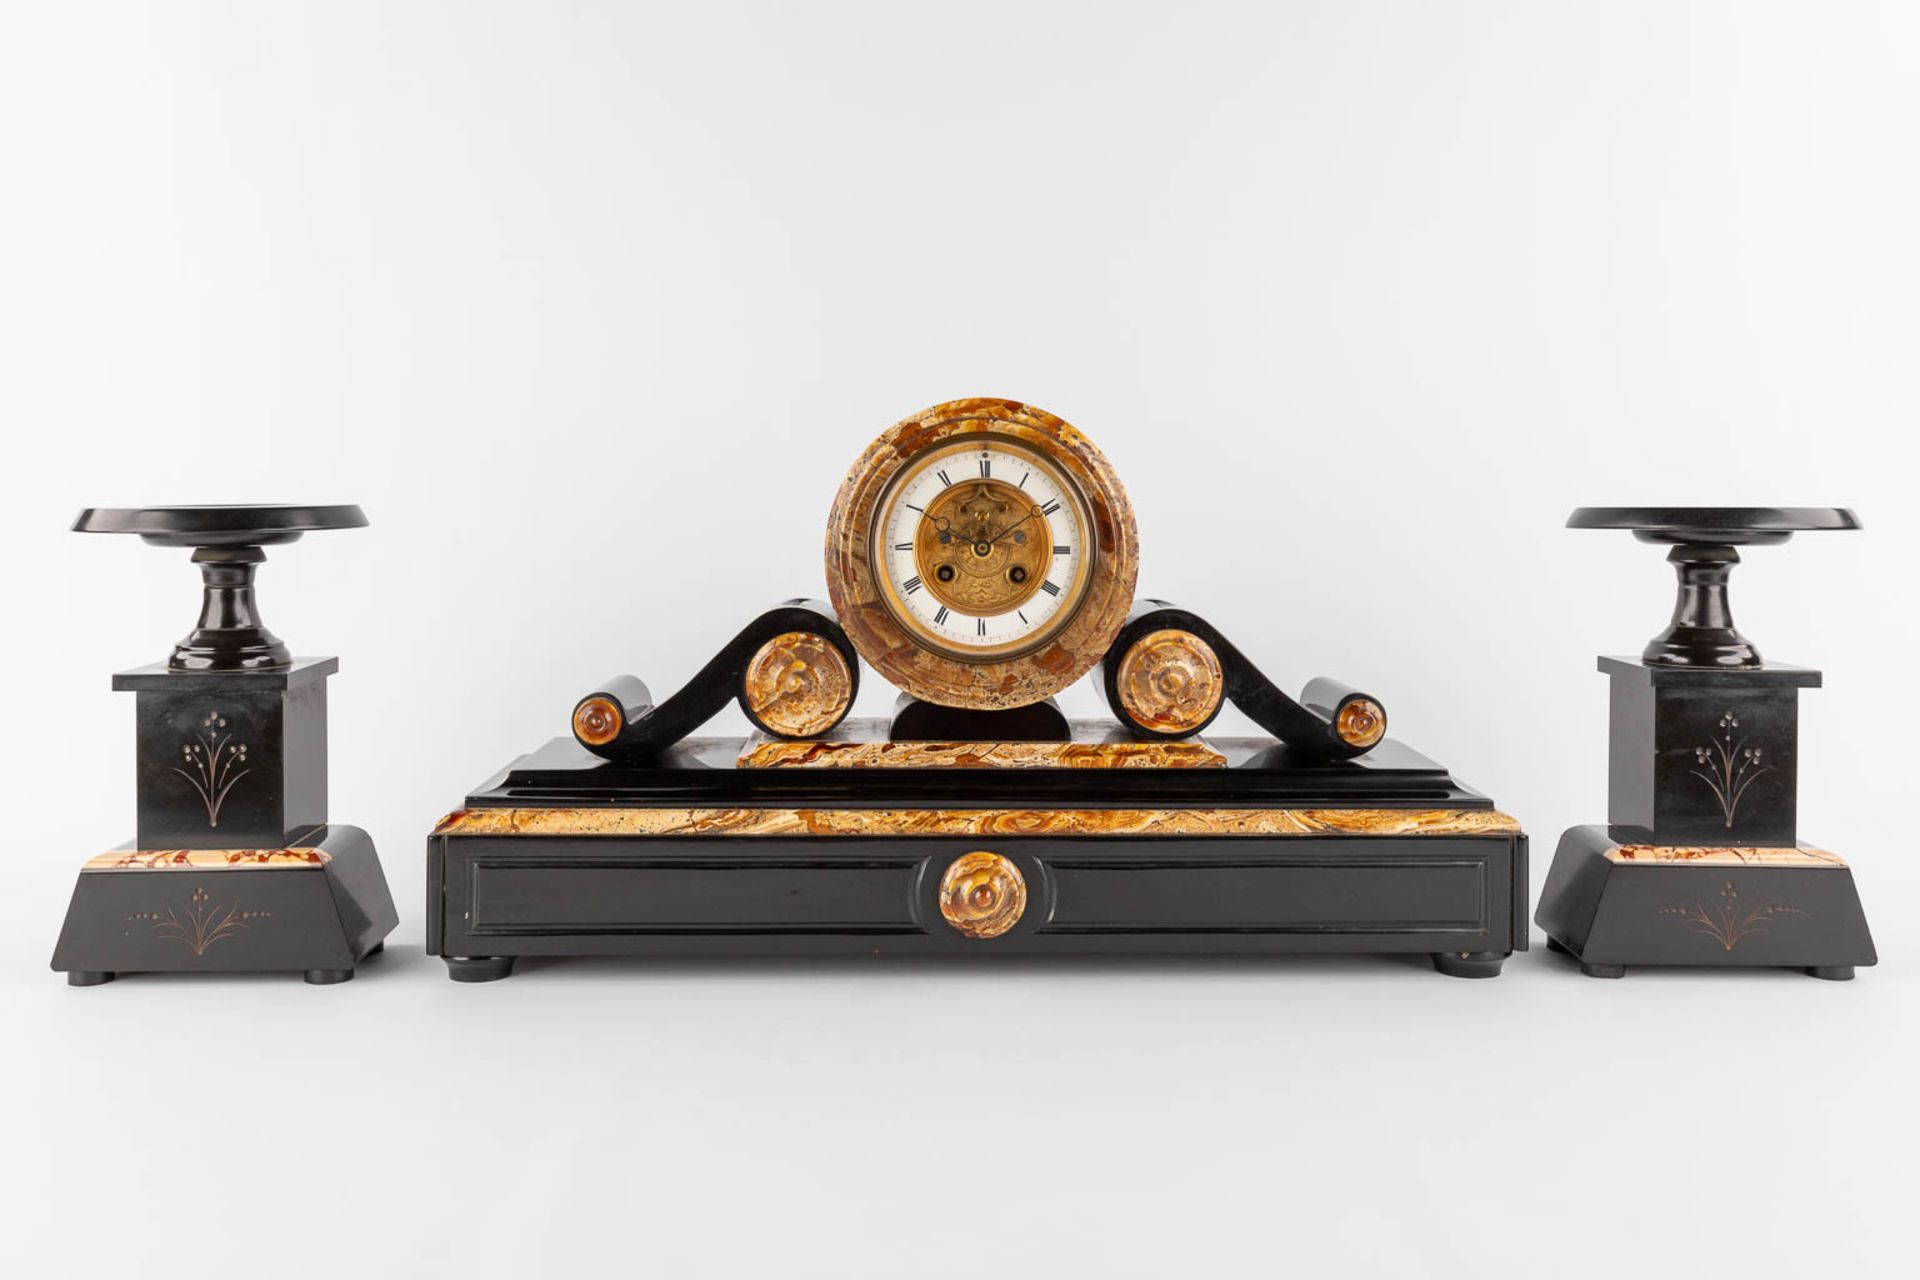 A three-piece mantle garniture clock and side pieces, marble. Circa 1900. (D:15 x W:54 x H:30 cm) - Image 3 of 12